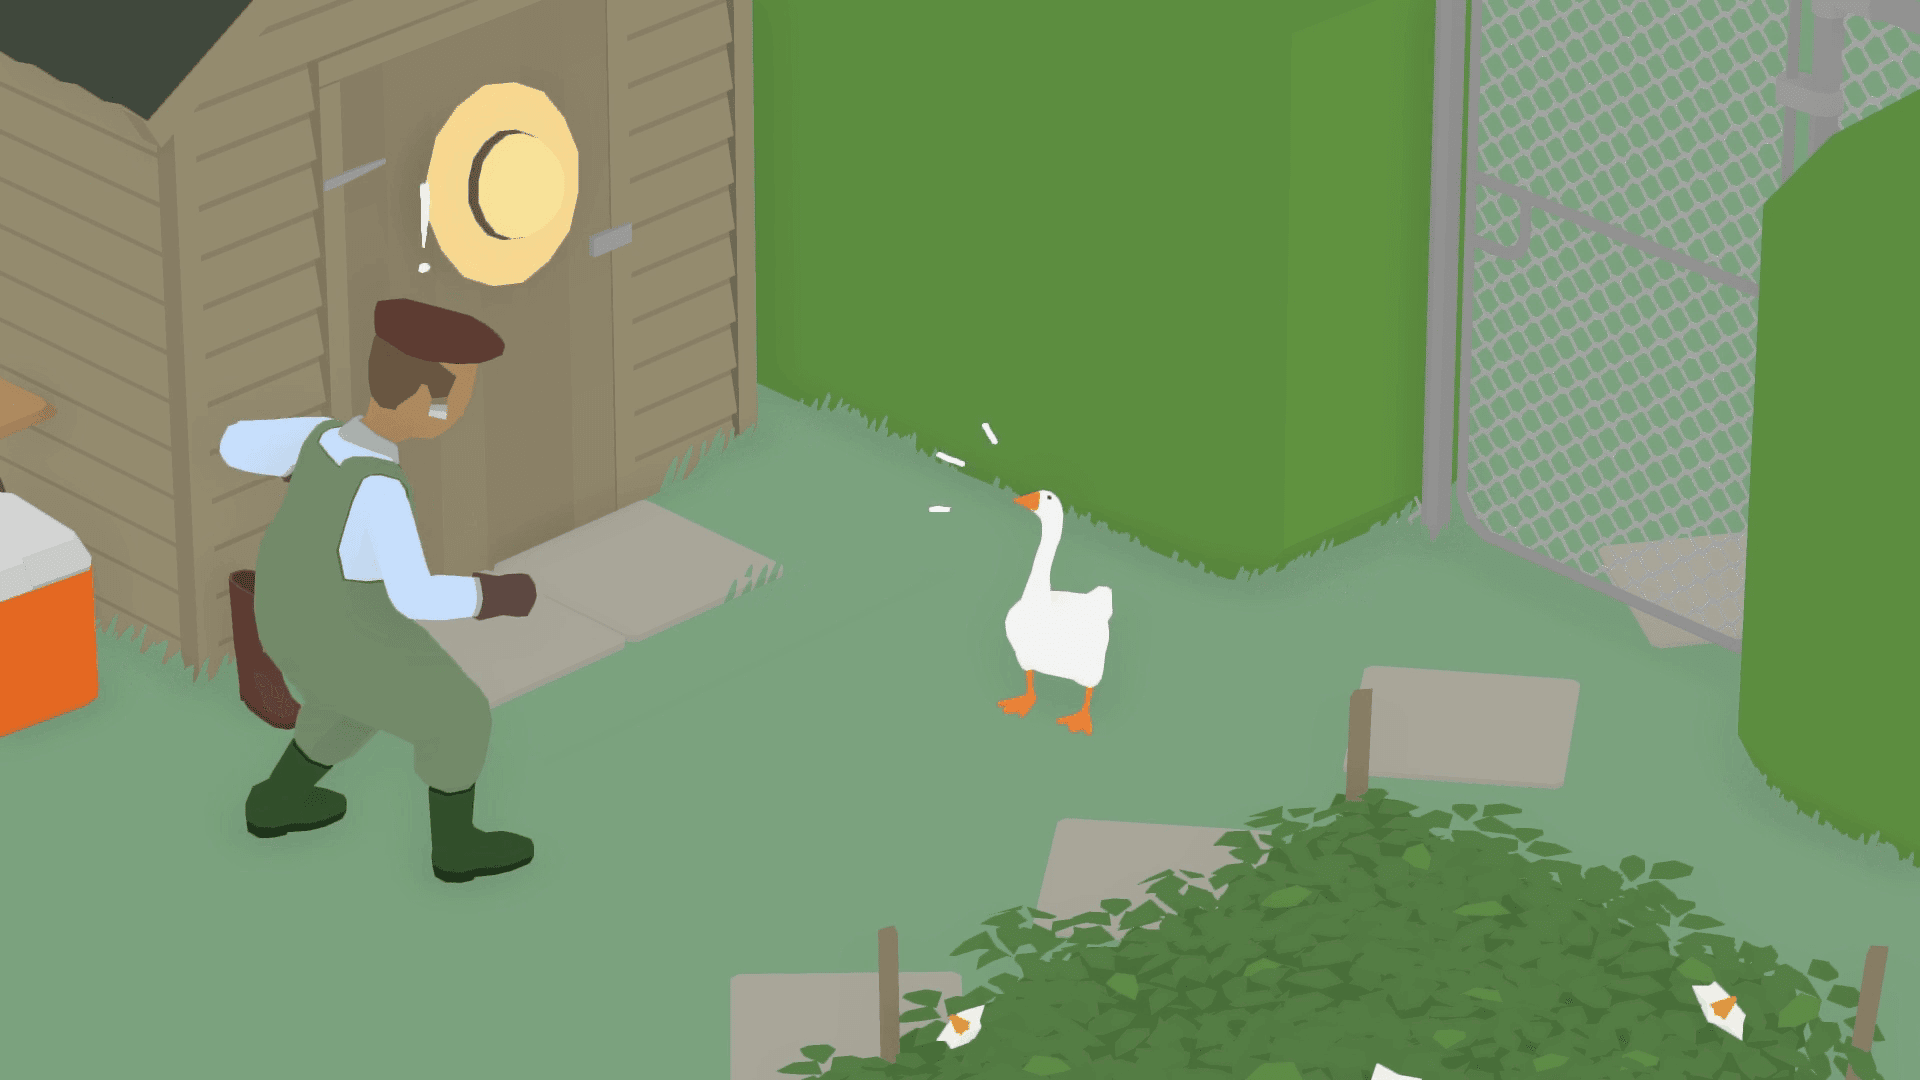 download switch goose game for free